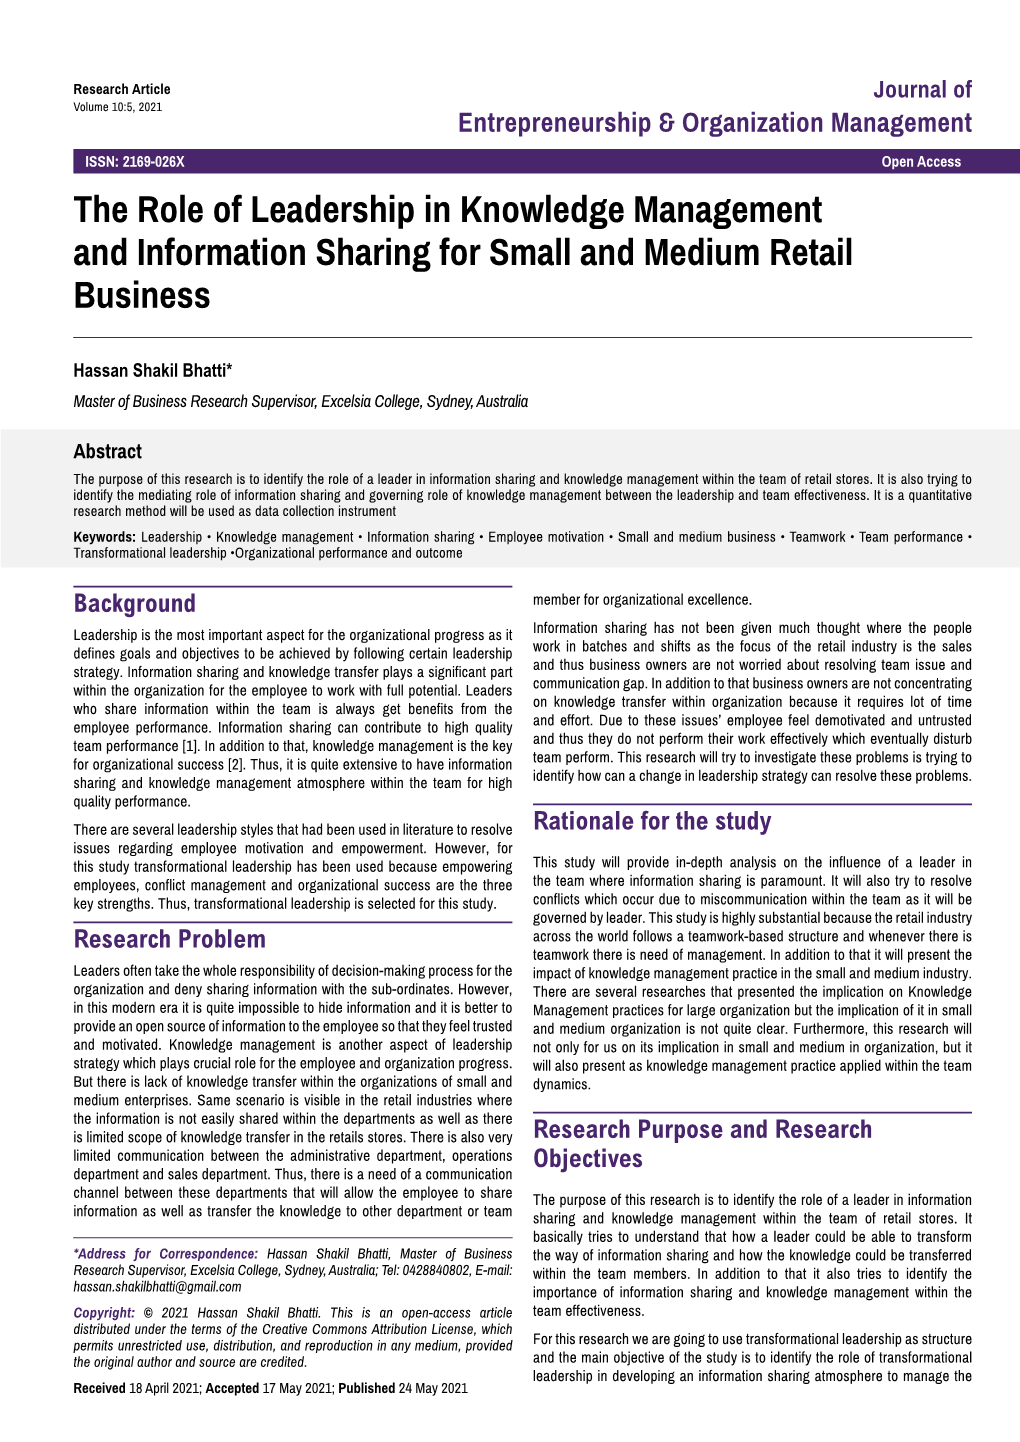 The Role of Leadership in Knowledge Management and Information Sharing for Small and Medium Retail Business